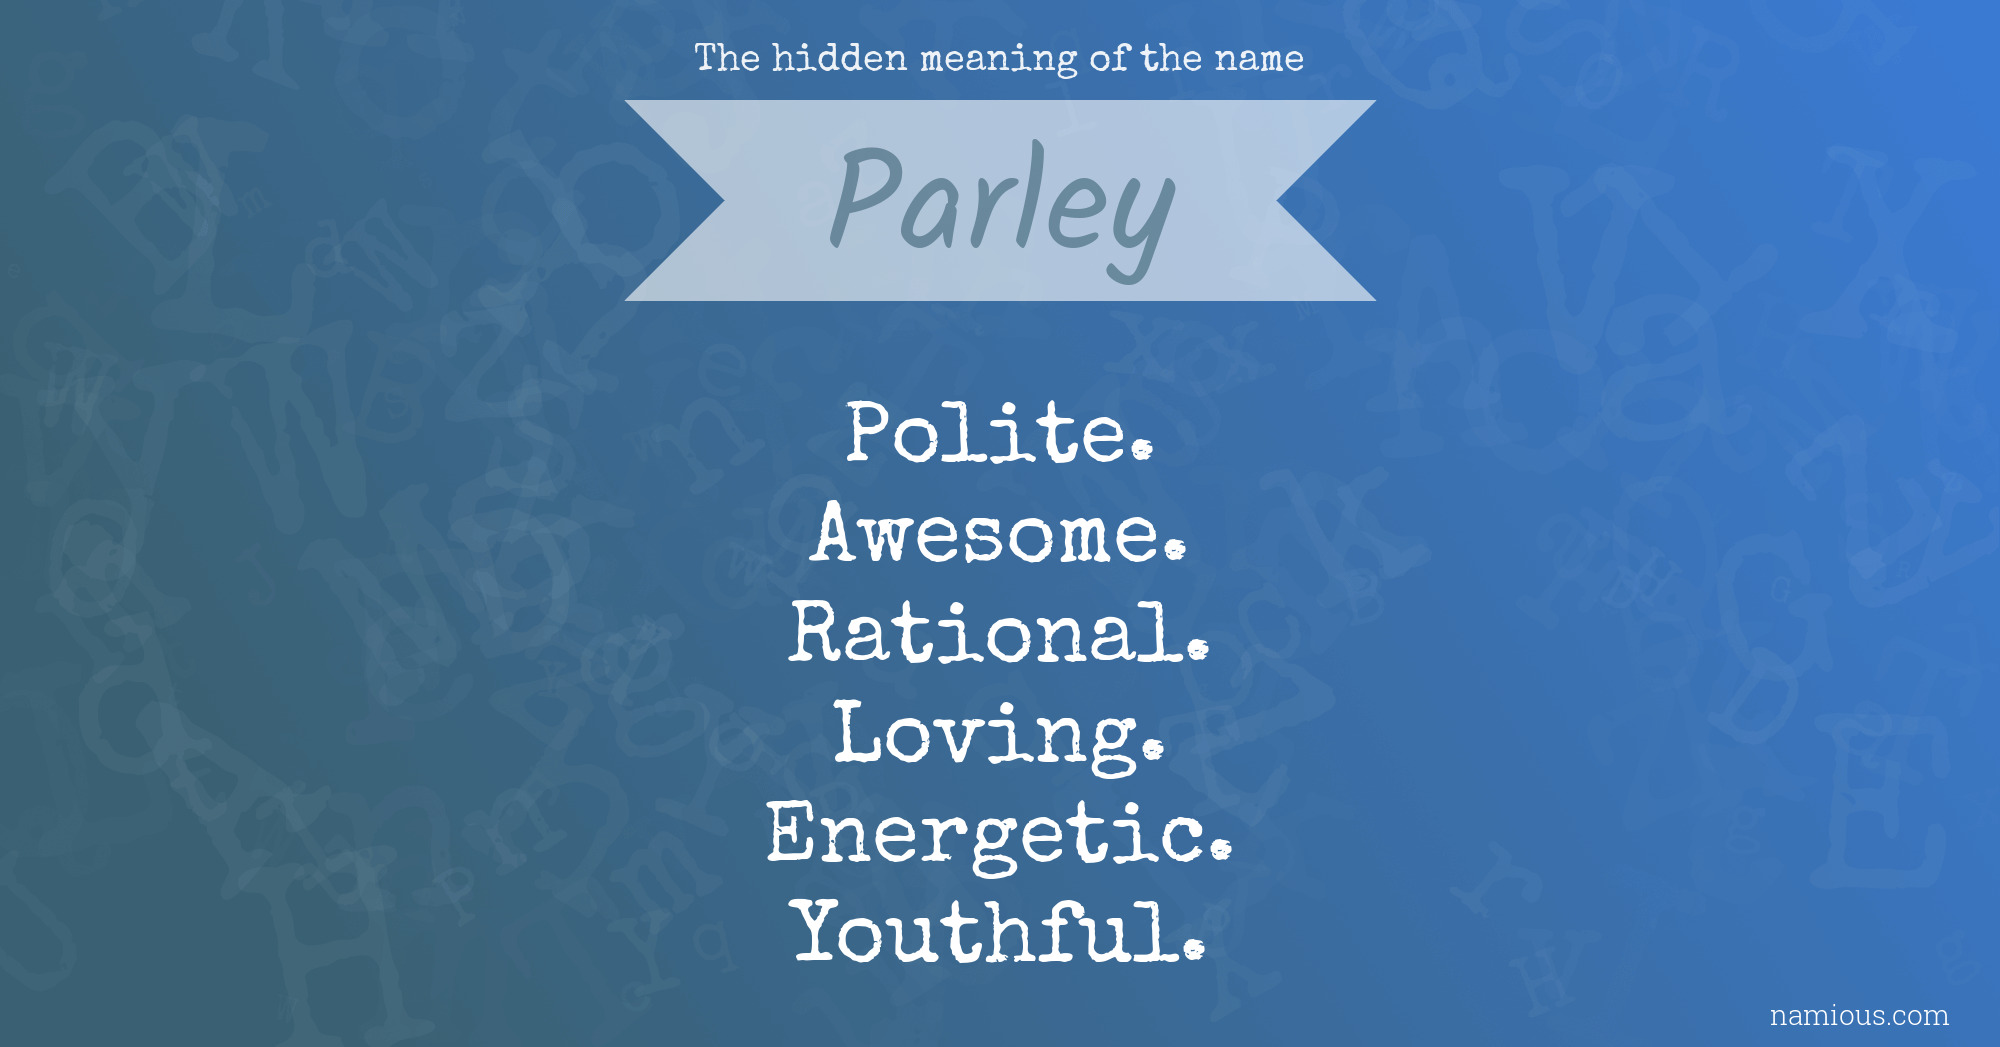 Parley meaning